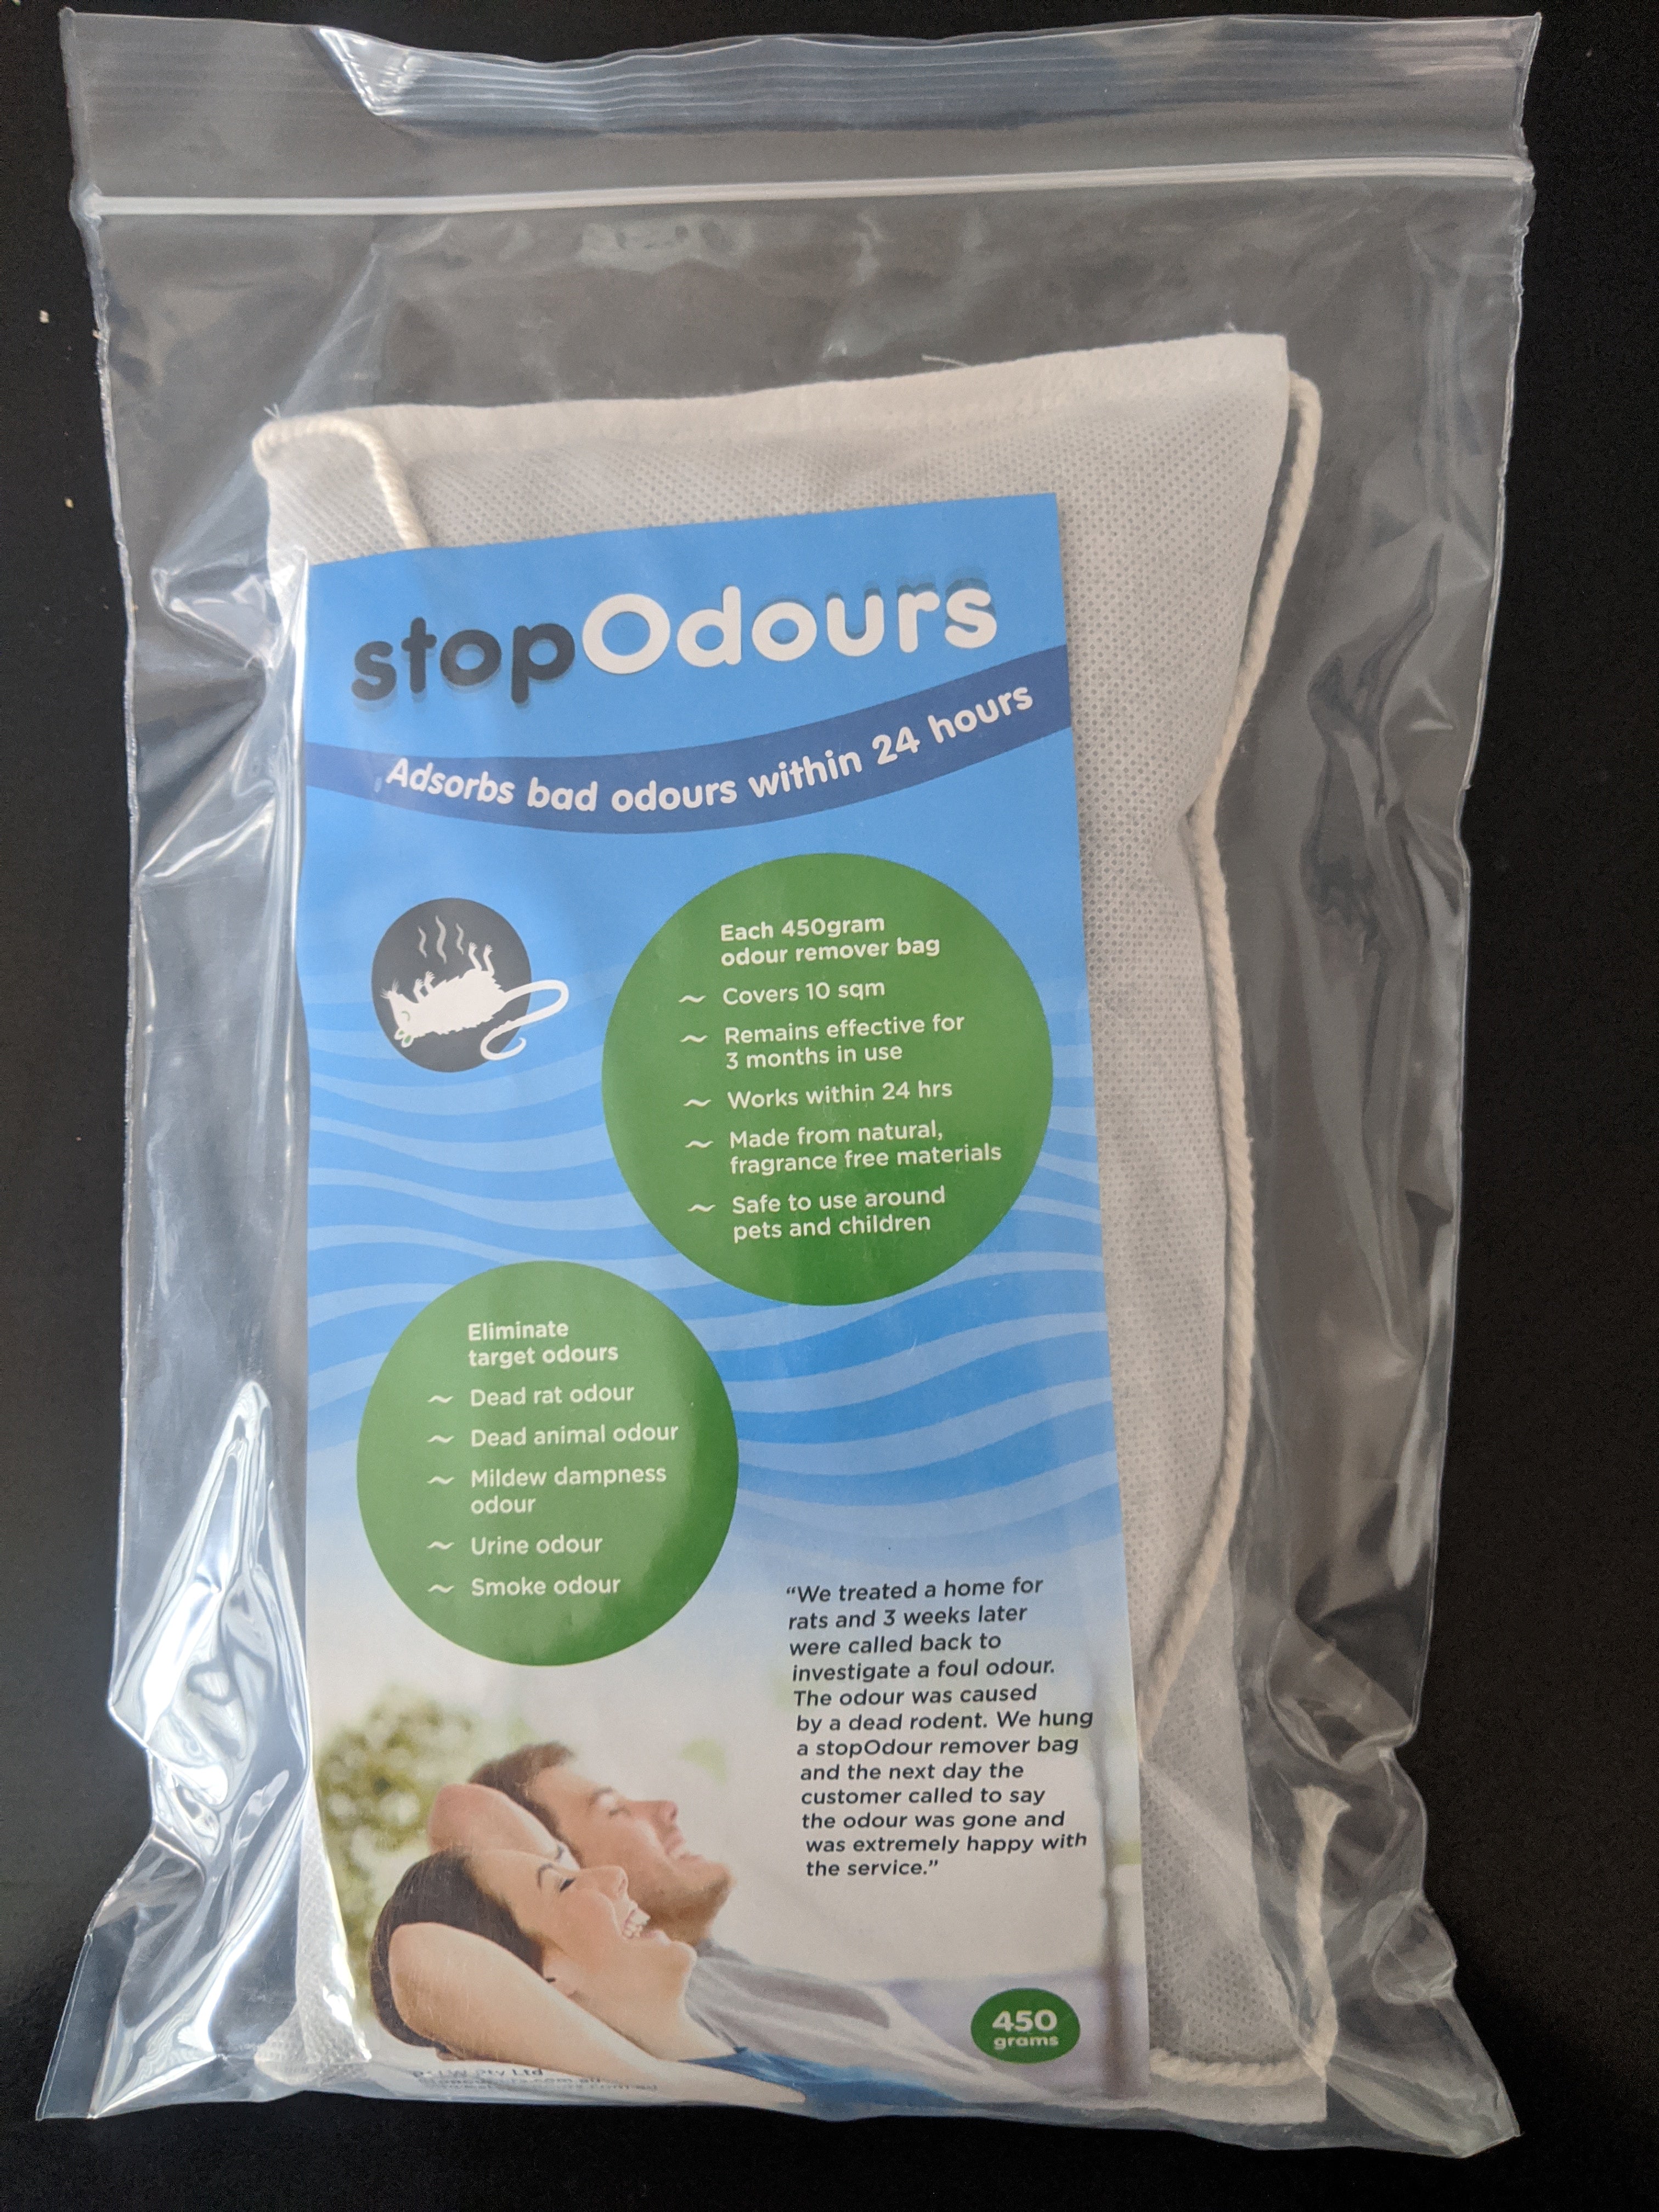 Get rid of foul odours (Dead rats, Cigarette smoke, pet urine) naturally